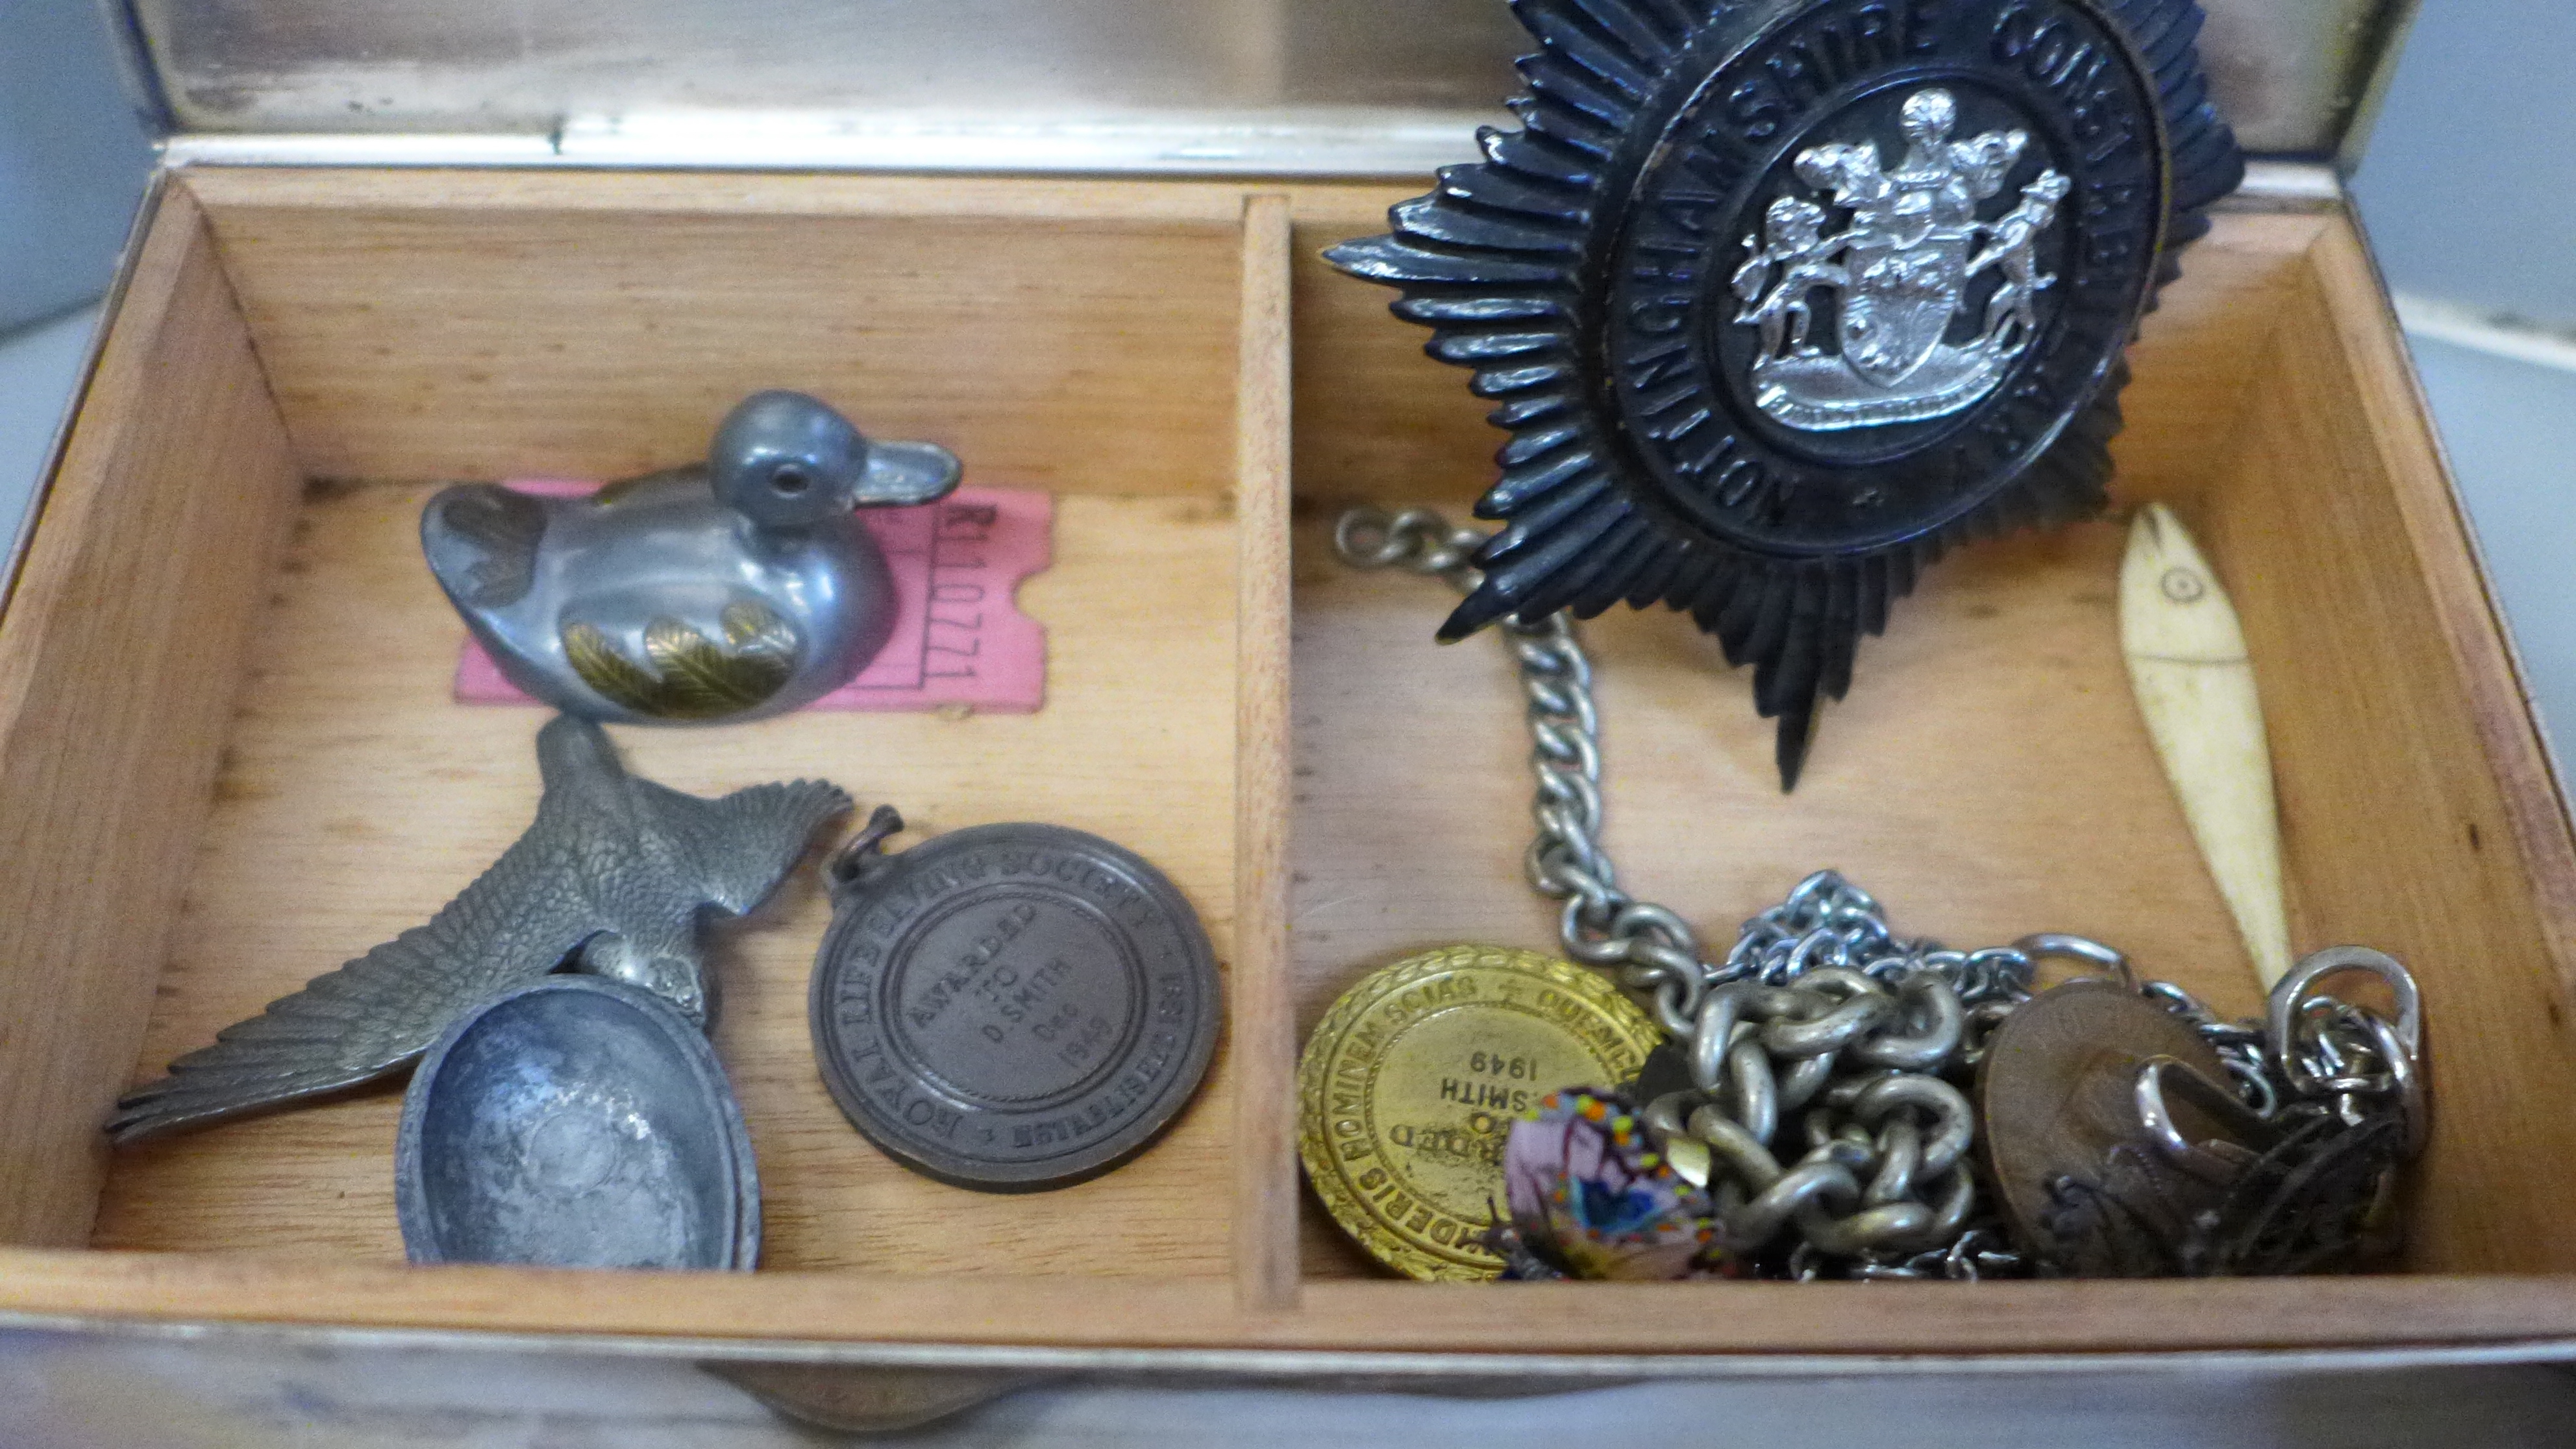 Nottinghamshire Constabulary badges, other badges, coins, a plated box, etc. - Image 4 of 4